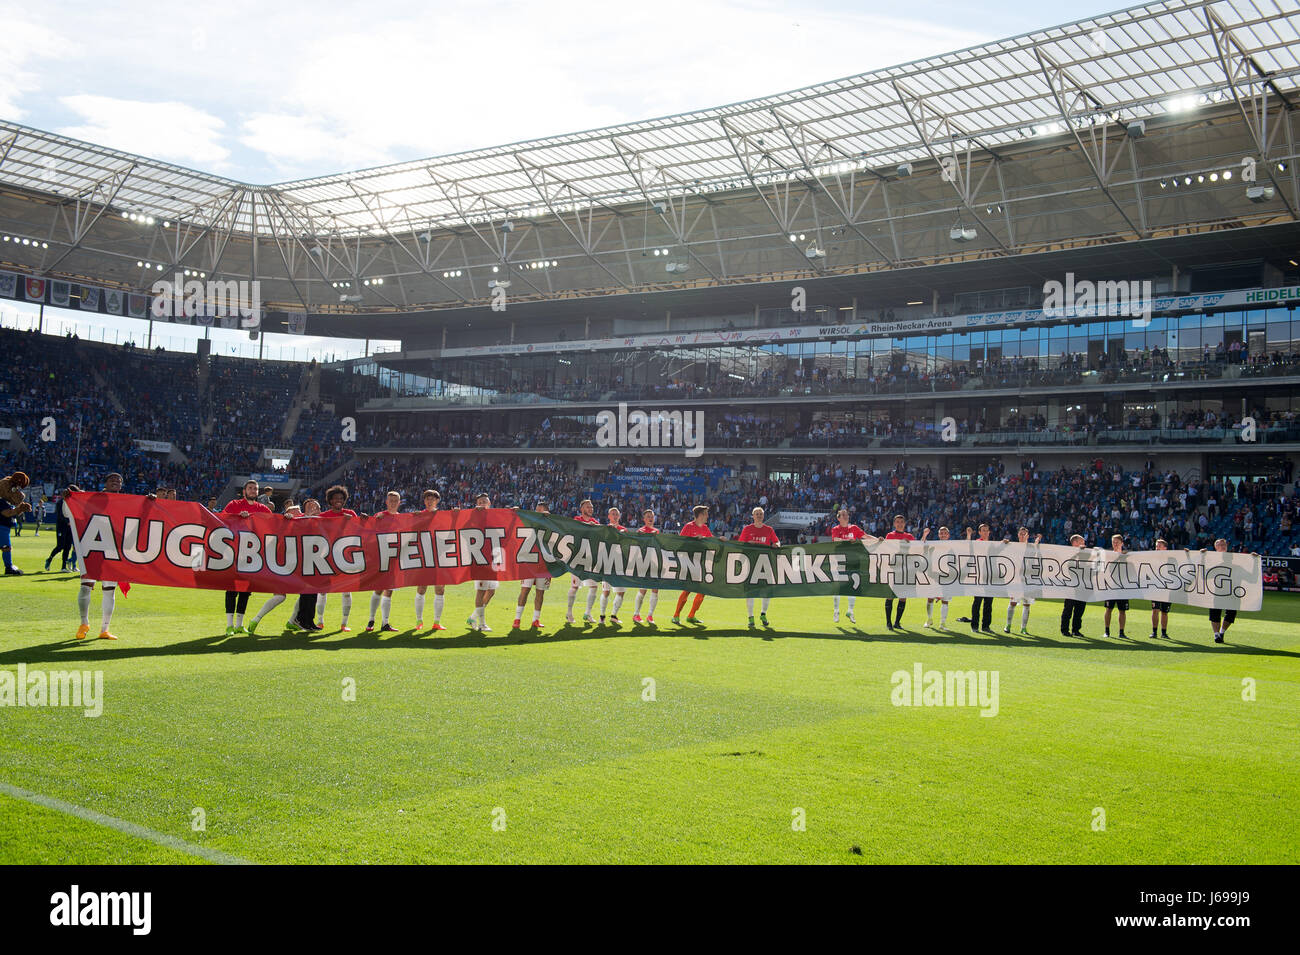 FC Augsburg's team thanks the fans with a banner 'Augsburg feiert zusammen! Danke, ihr seid erstklassig' (lit. Augsburg celebrates together! Thank you, you are first-class)after the German Bundesliga soccer match between 1899 Hoffenheim and FC Augsburg in the Wirsol Rhein-Neckar-Arena in Sinsheim, Germany, 20 May 2017. The German Bundesliga soccer match between 1899 Hoffenheim and FC Augsburg ended in a tie (0-0). (EMBARGO CONDITIONS - ATTENTION: Due to the accreditation guidelines, the DFL only permits the publication and utilisation of up to 15 pictures per match on the internet and in on Stock Photo